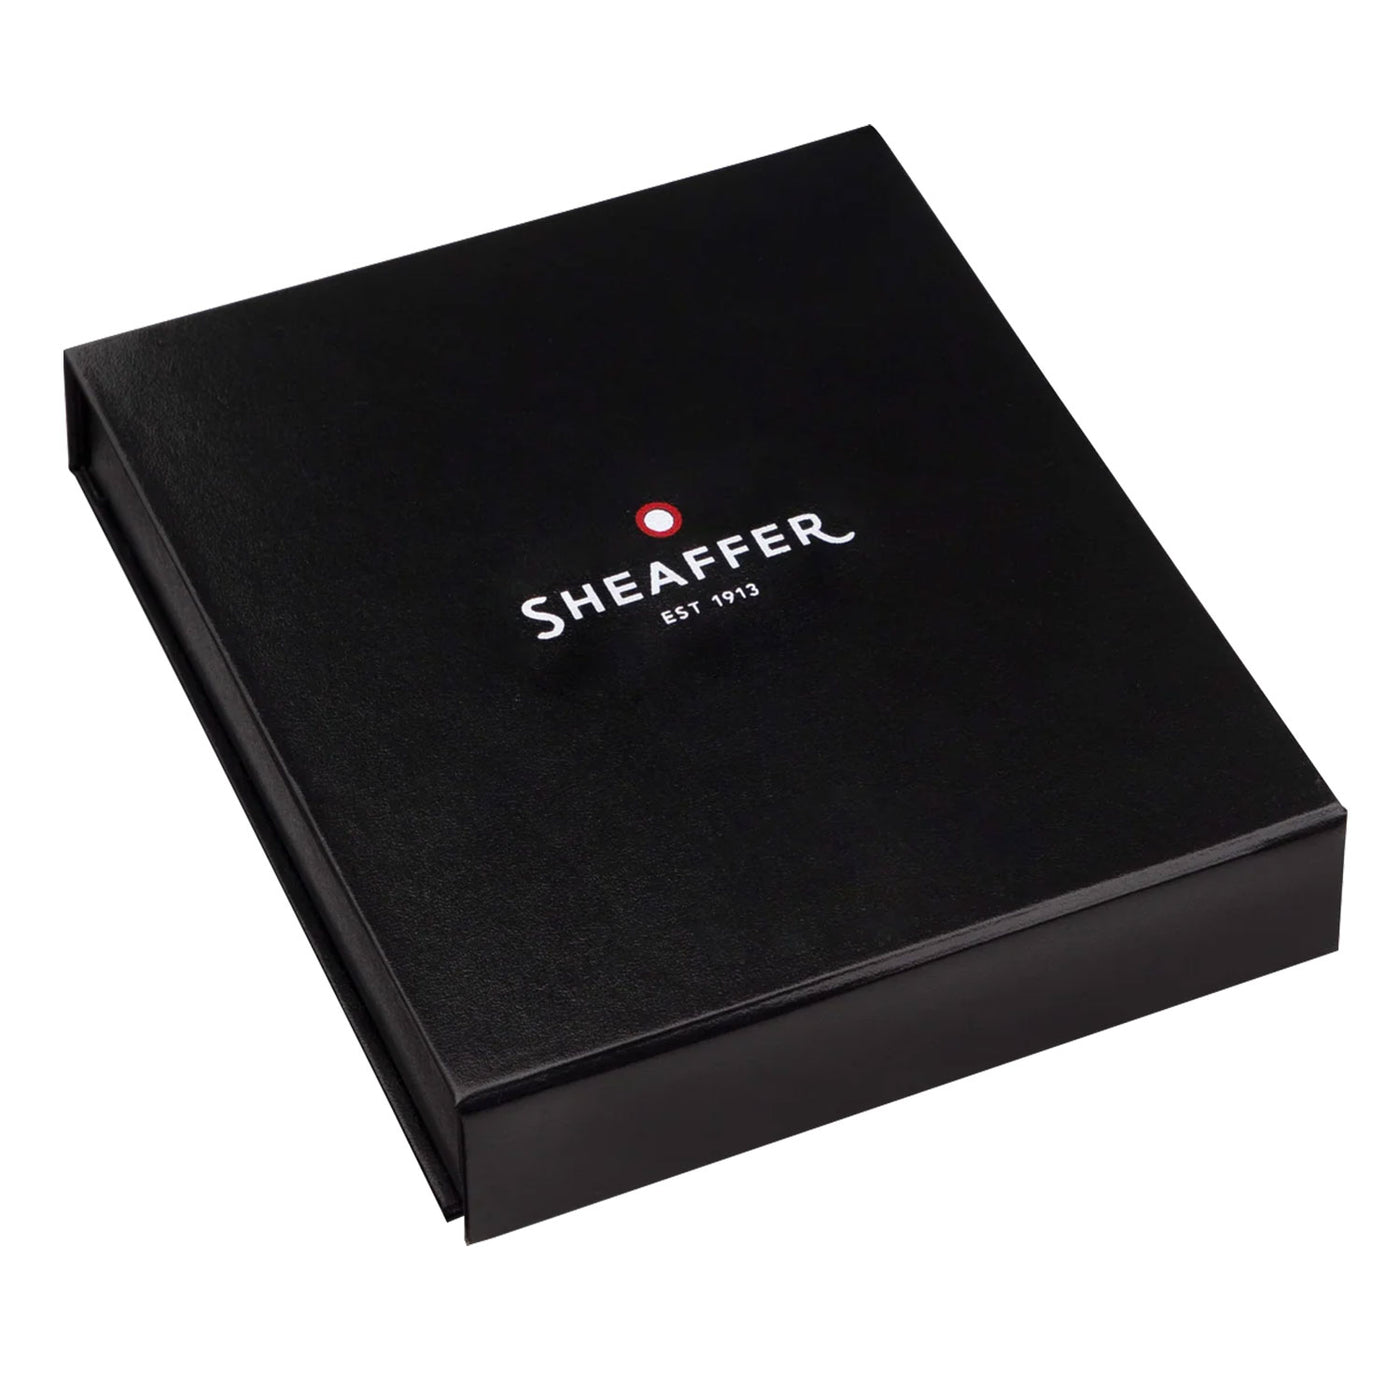 Sheaffer Gift Set - 300 Series Bright Chrome GT Ball Pen with Table Clock